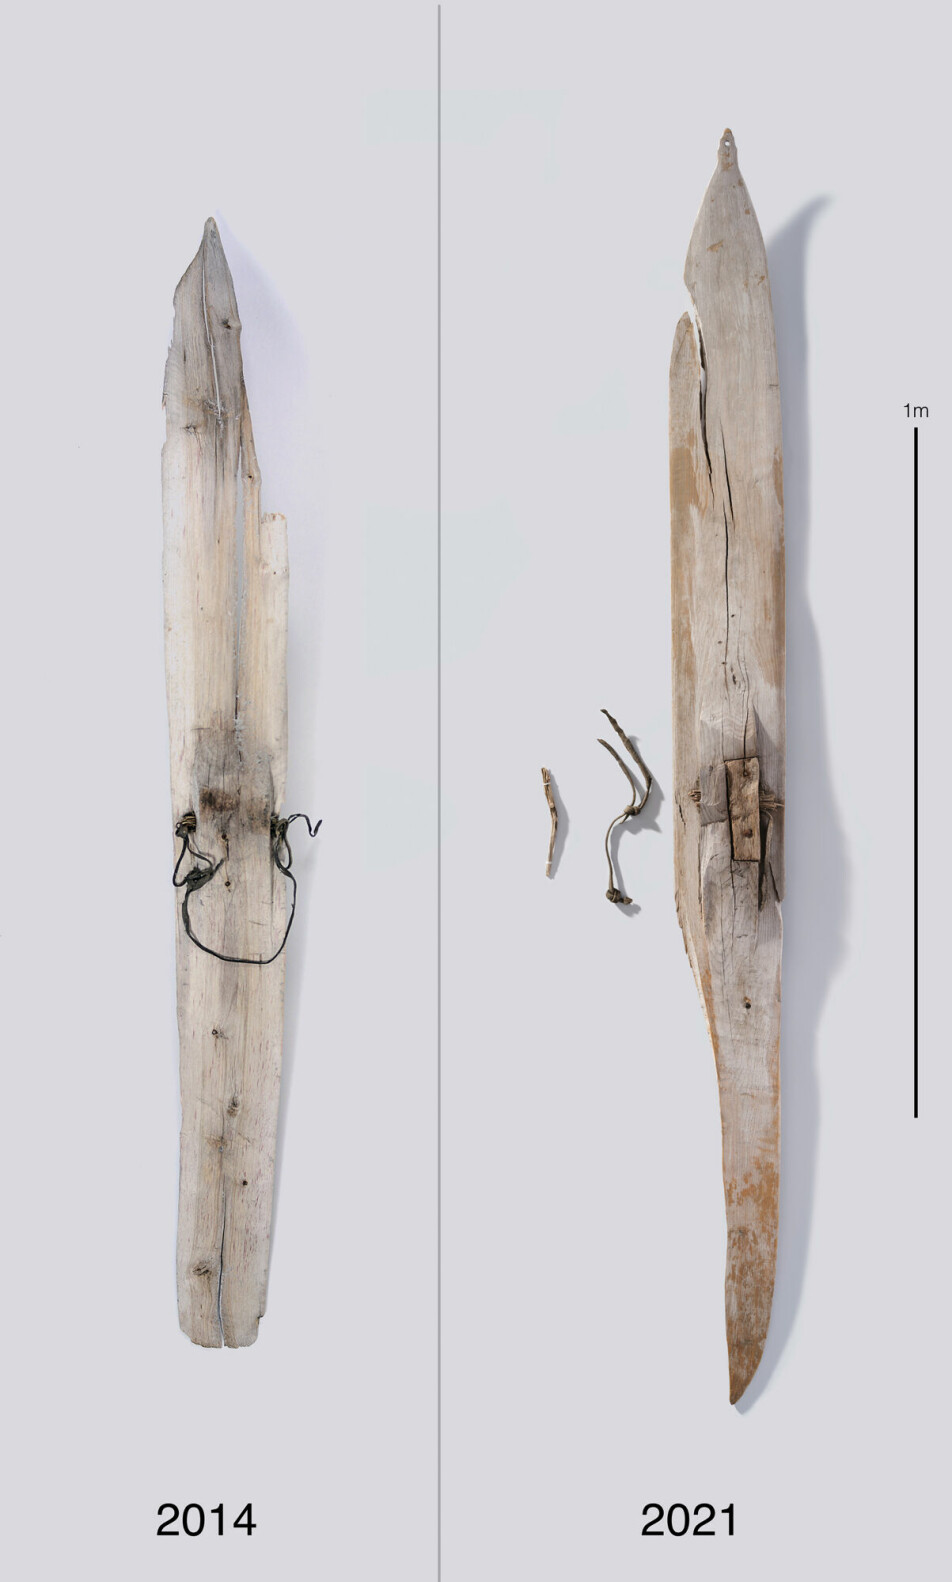 The first ski was found in 2014, the other ski melted out of the ice in 2021 just five meters away from the other. It has now been established that the skis are from the pre-Viking Age.